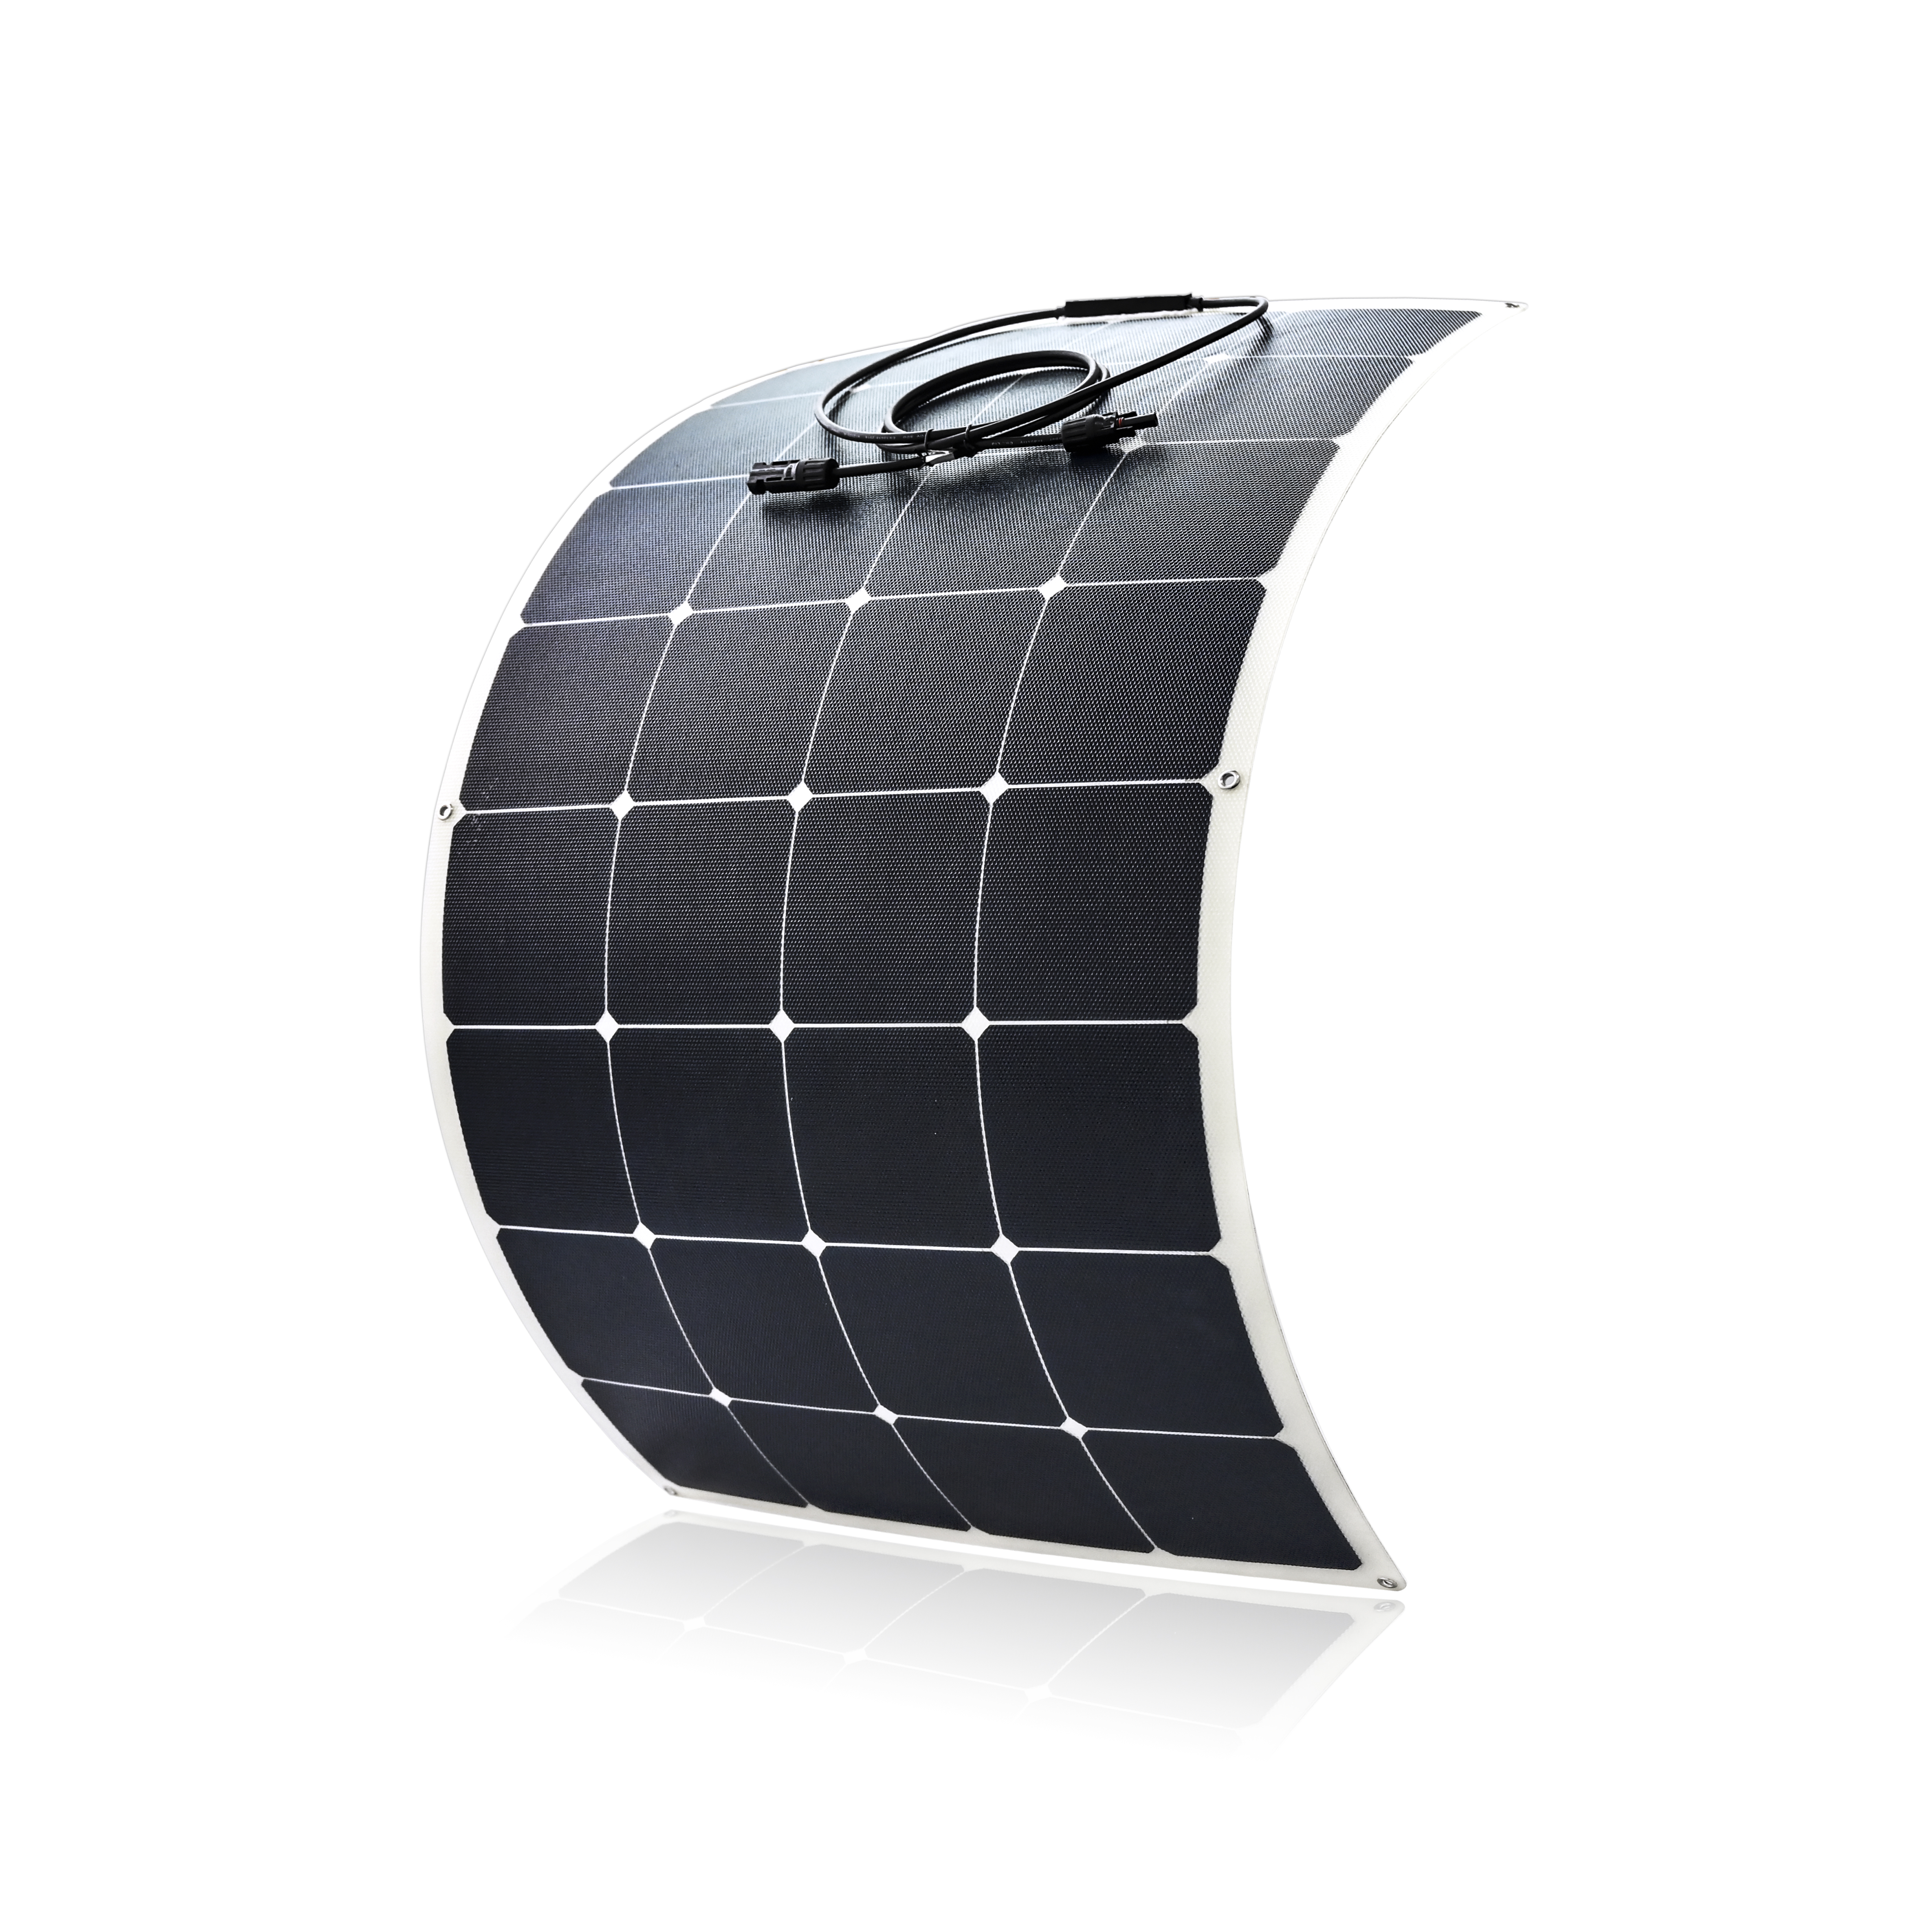 Sungold new product release: TF glass-free solar module